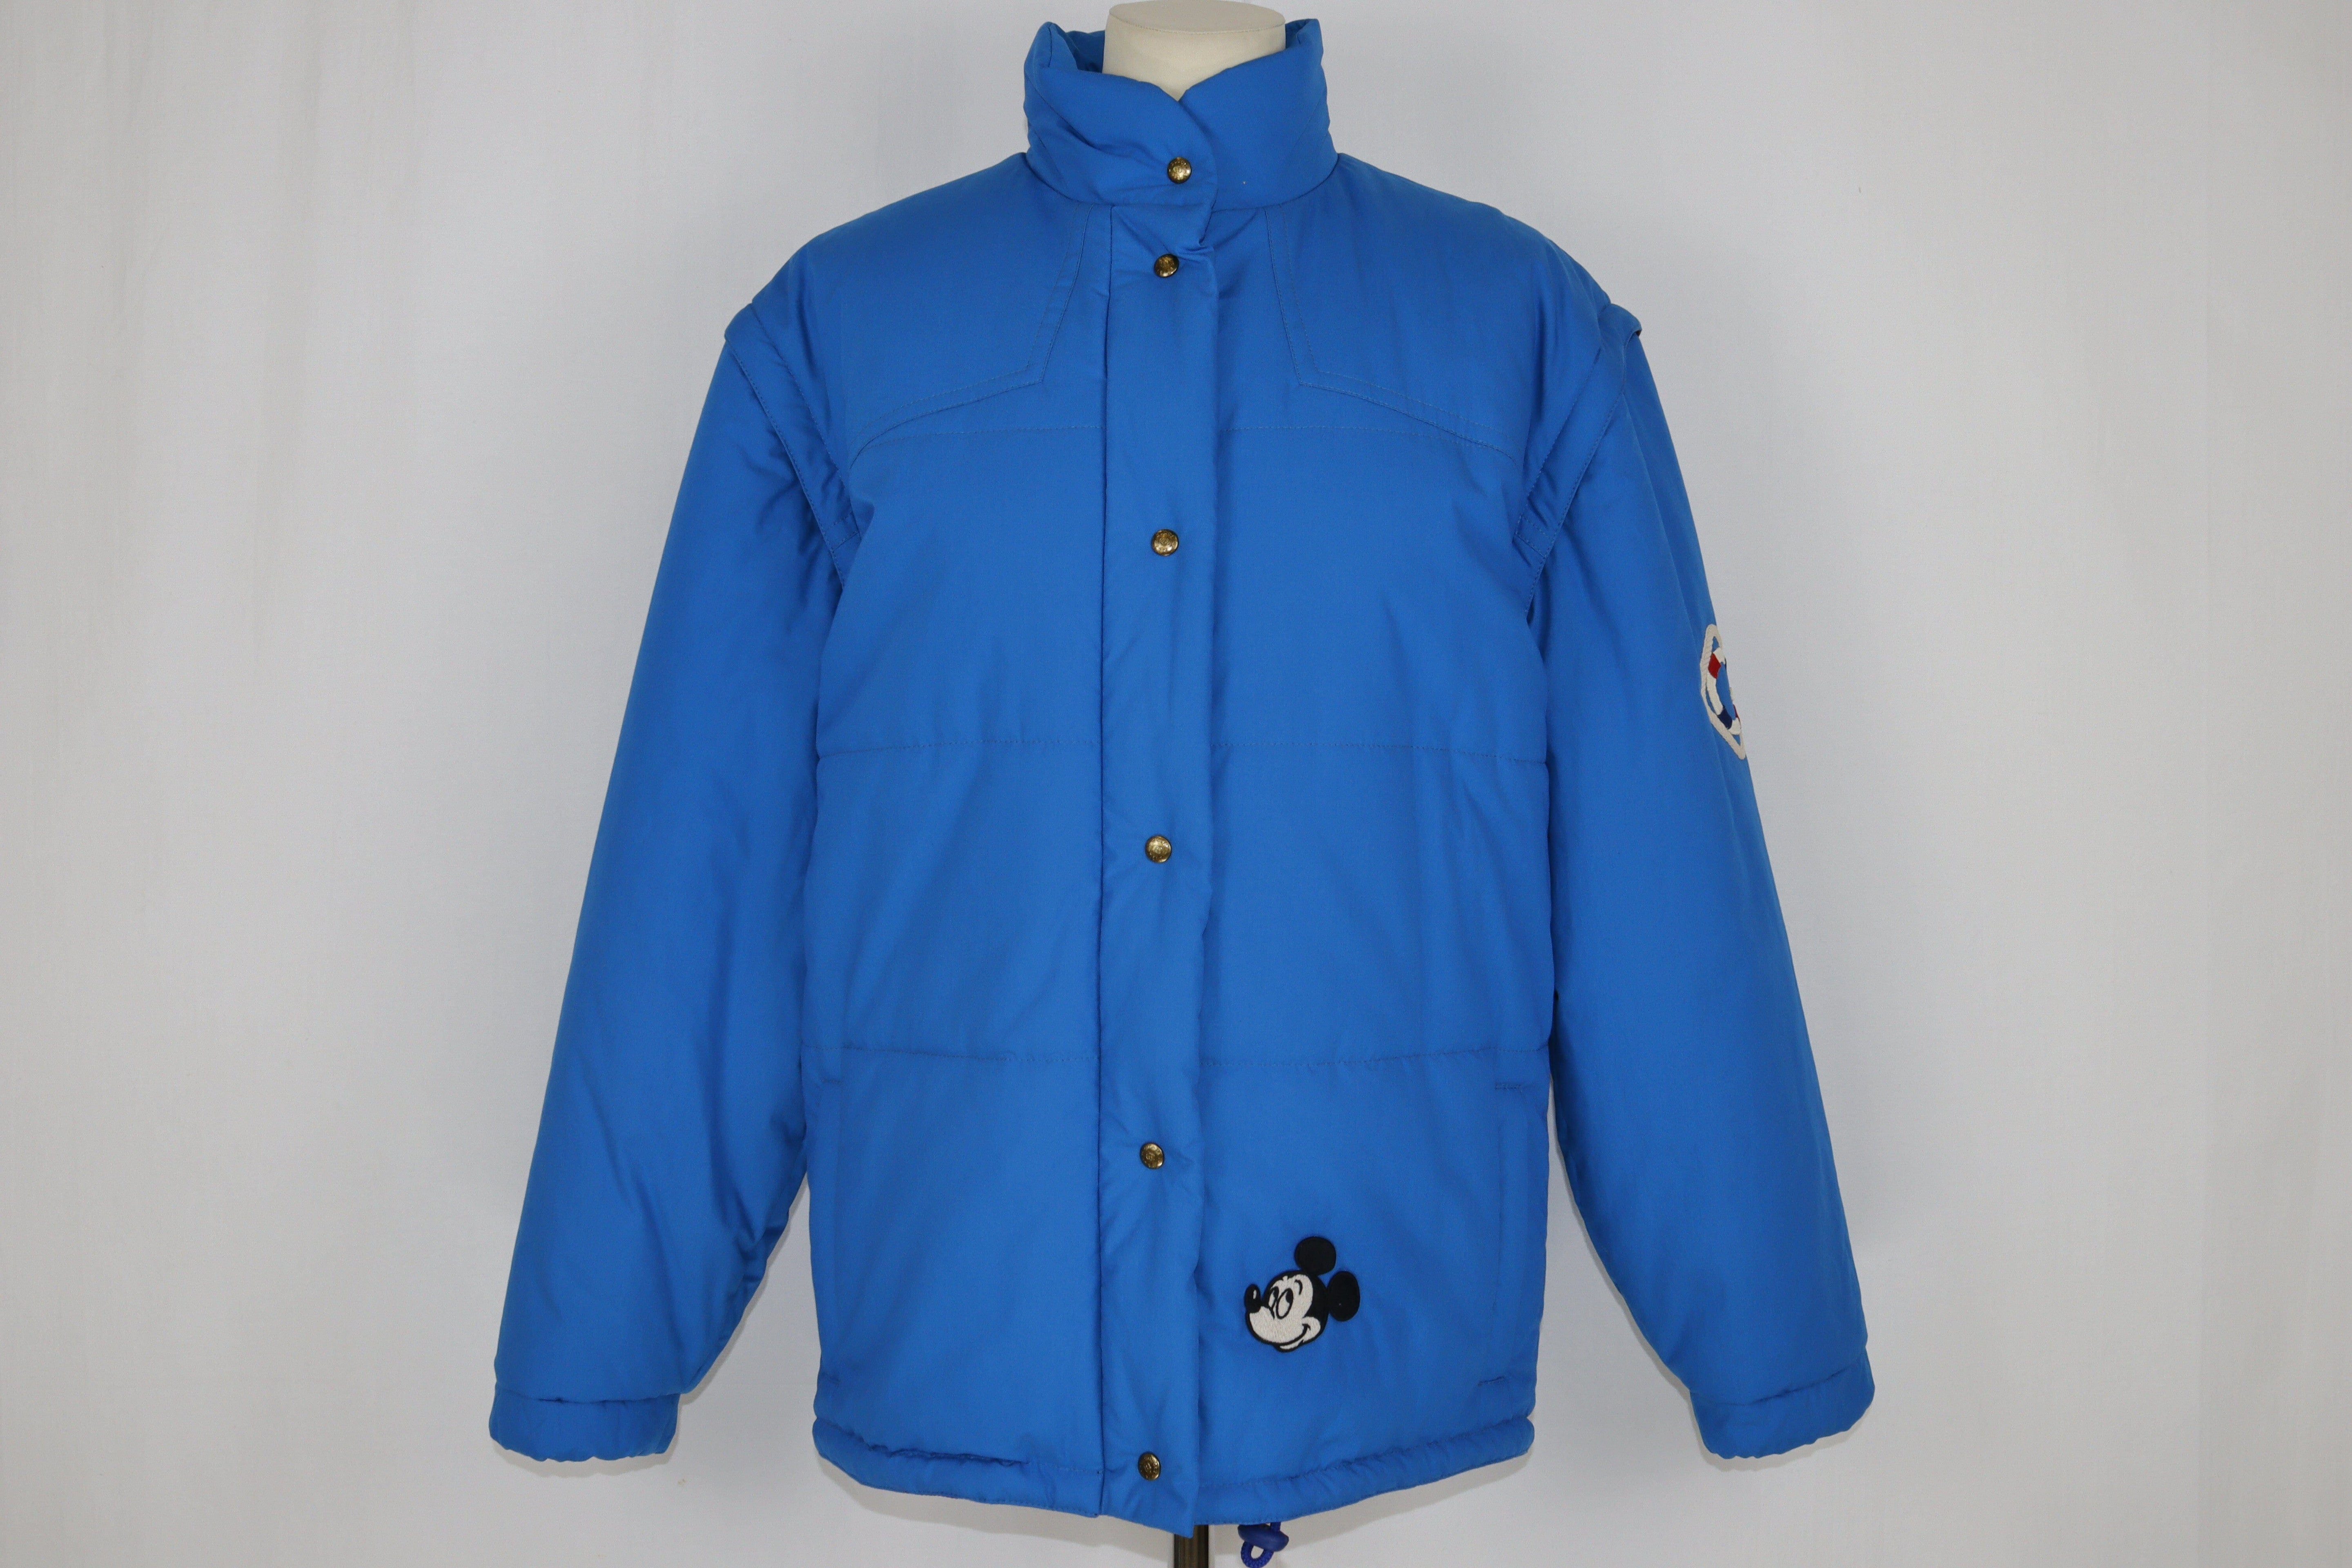 Blue 'Mickey Mouse' Puff Jacket w/ Removable Sleeves Clothing Gucci 